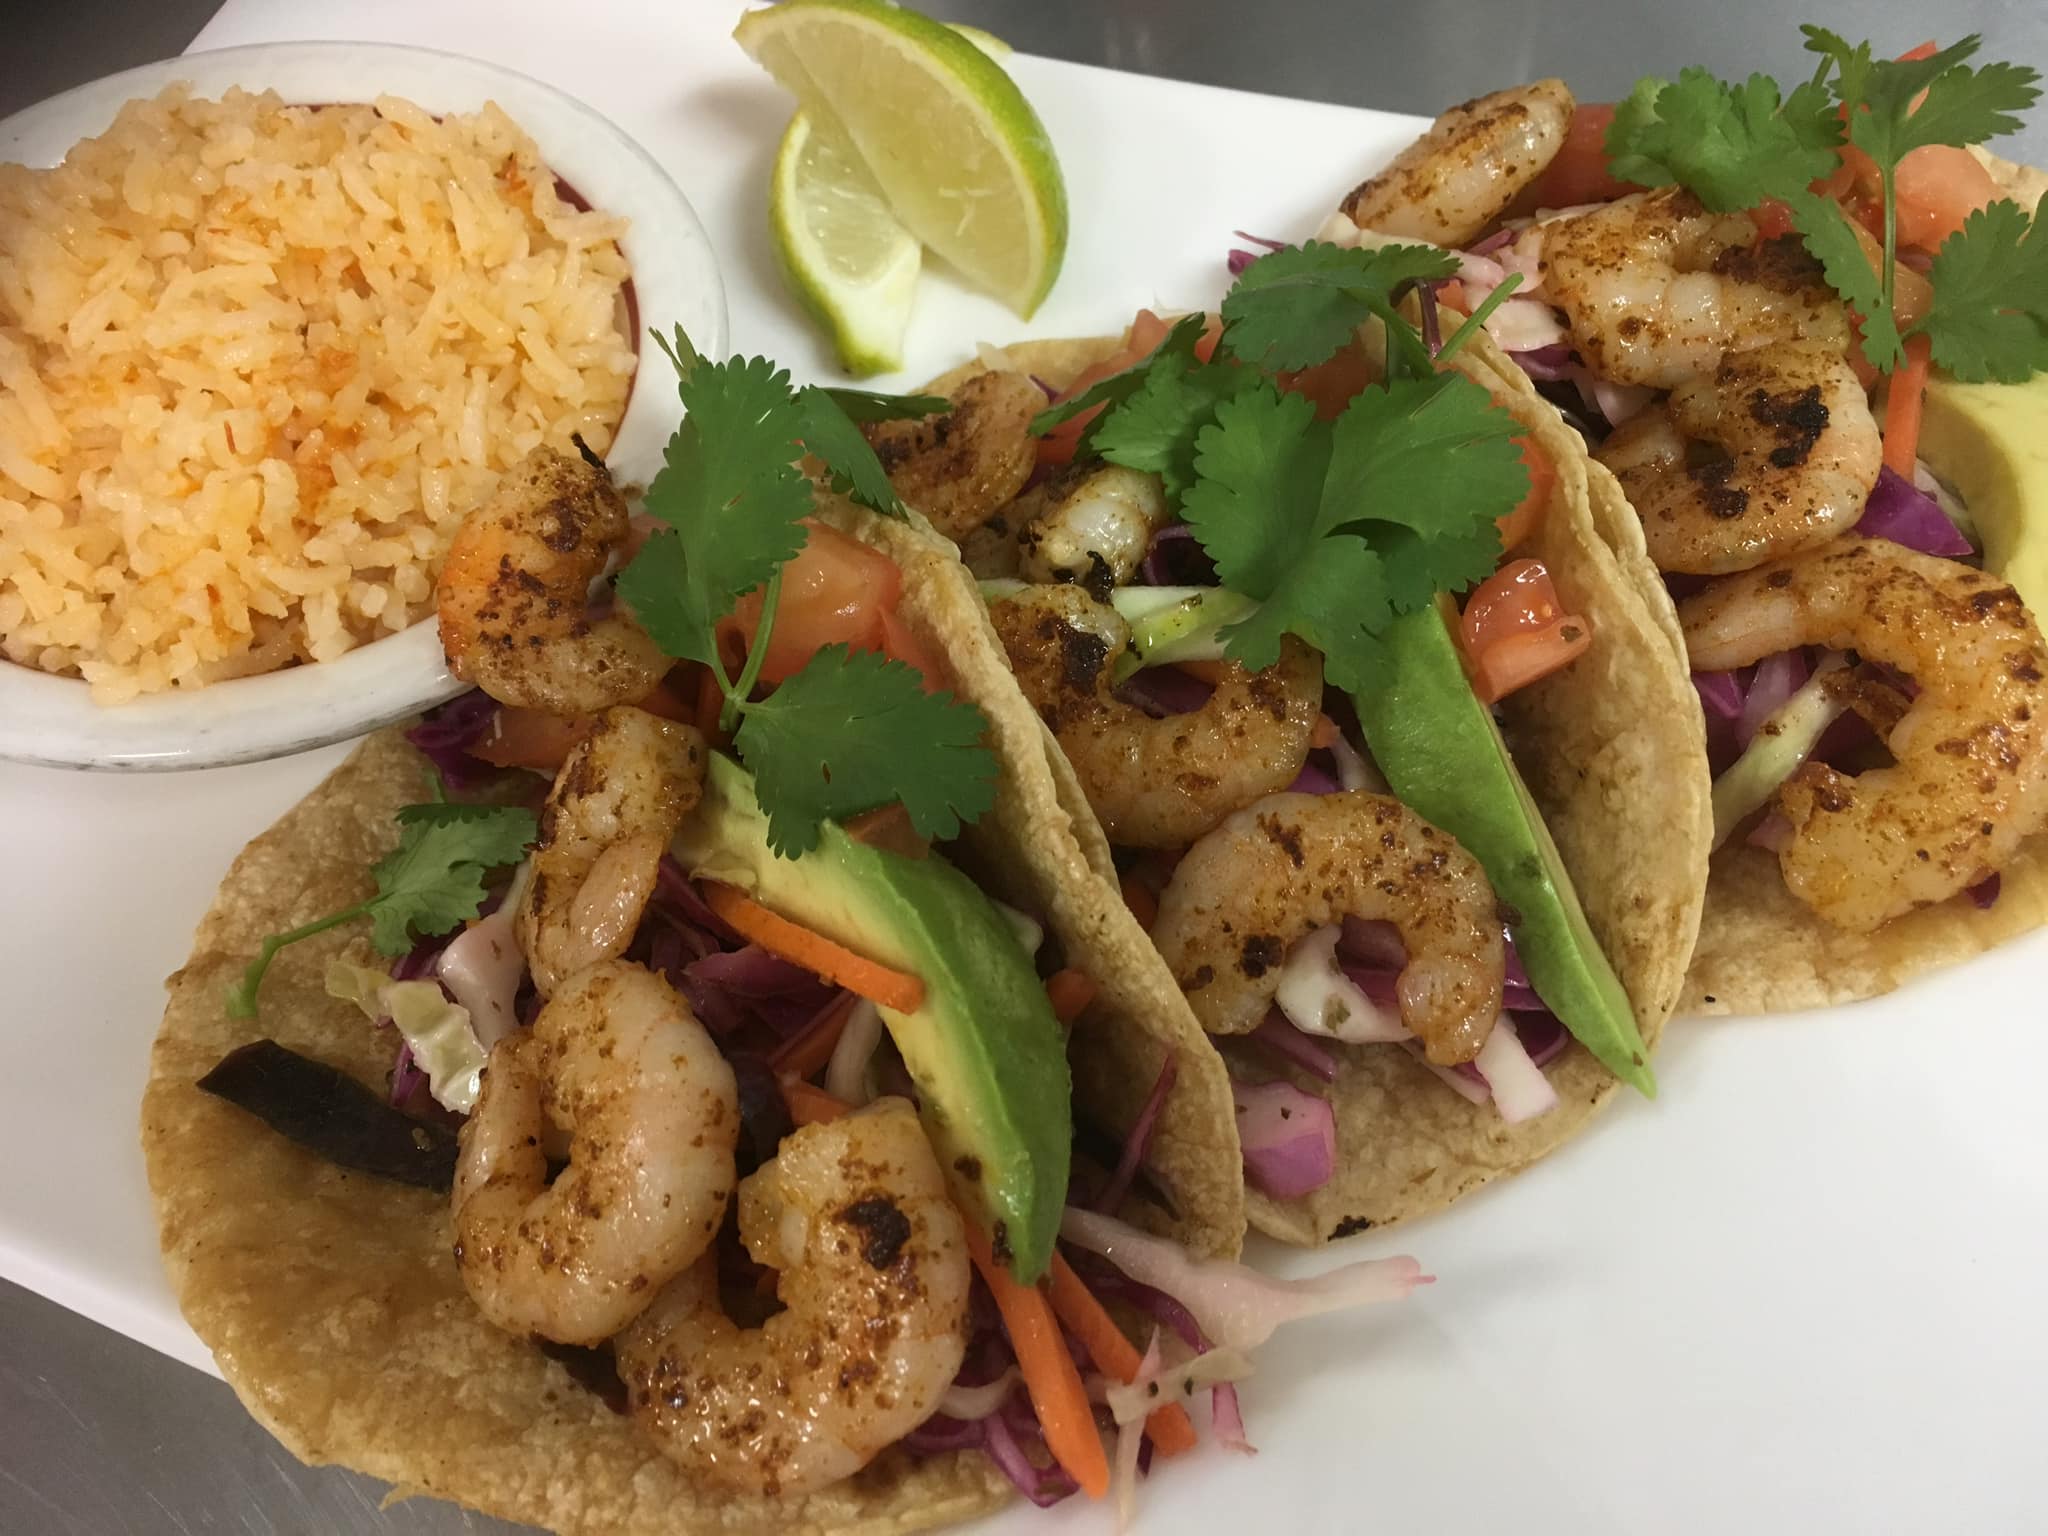 On a white plate, there are three shrimp tacos with a side of rice and two lime wedges. Photo by La Mixteca's Facebook page.